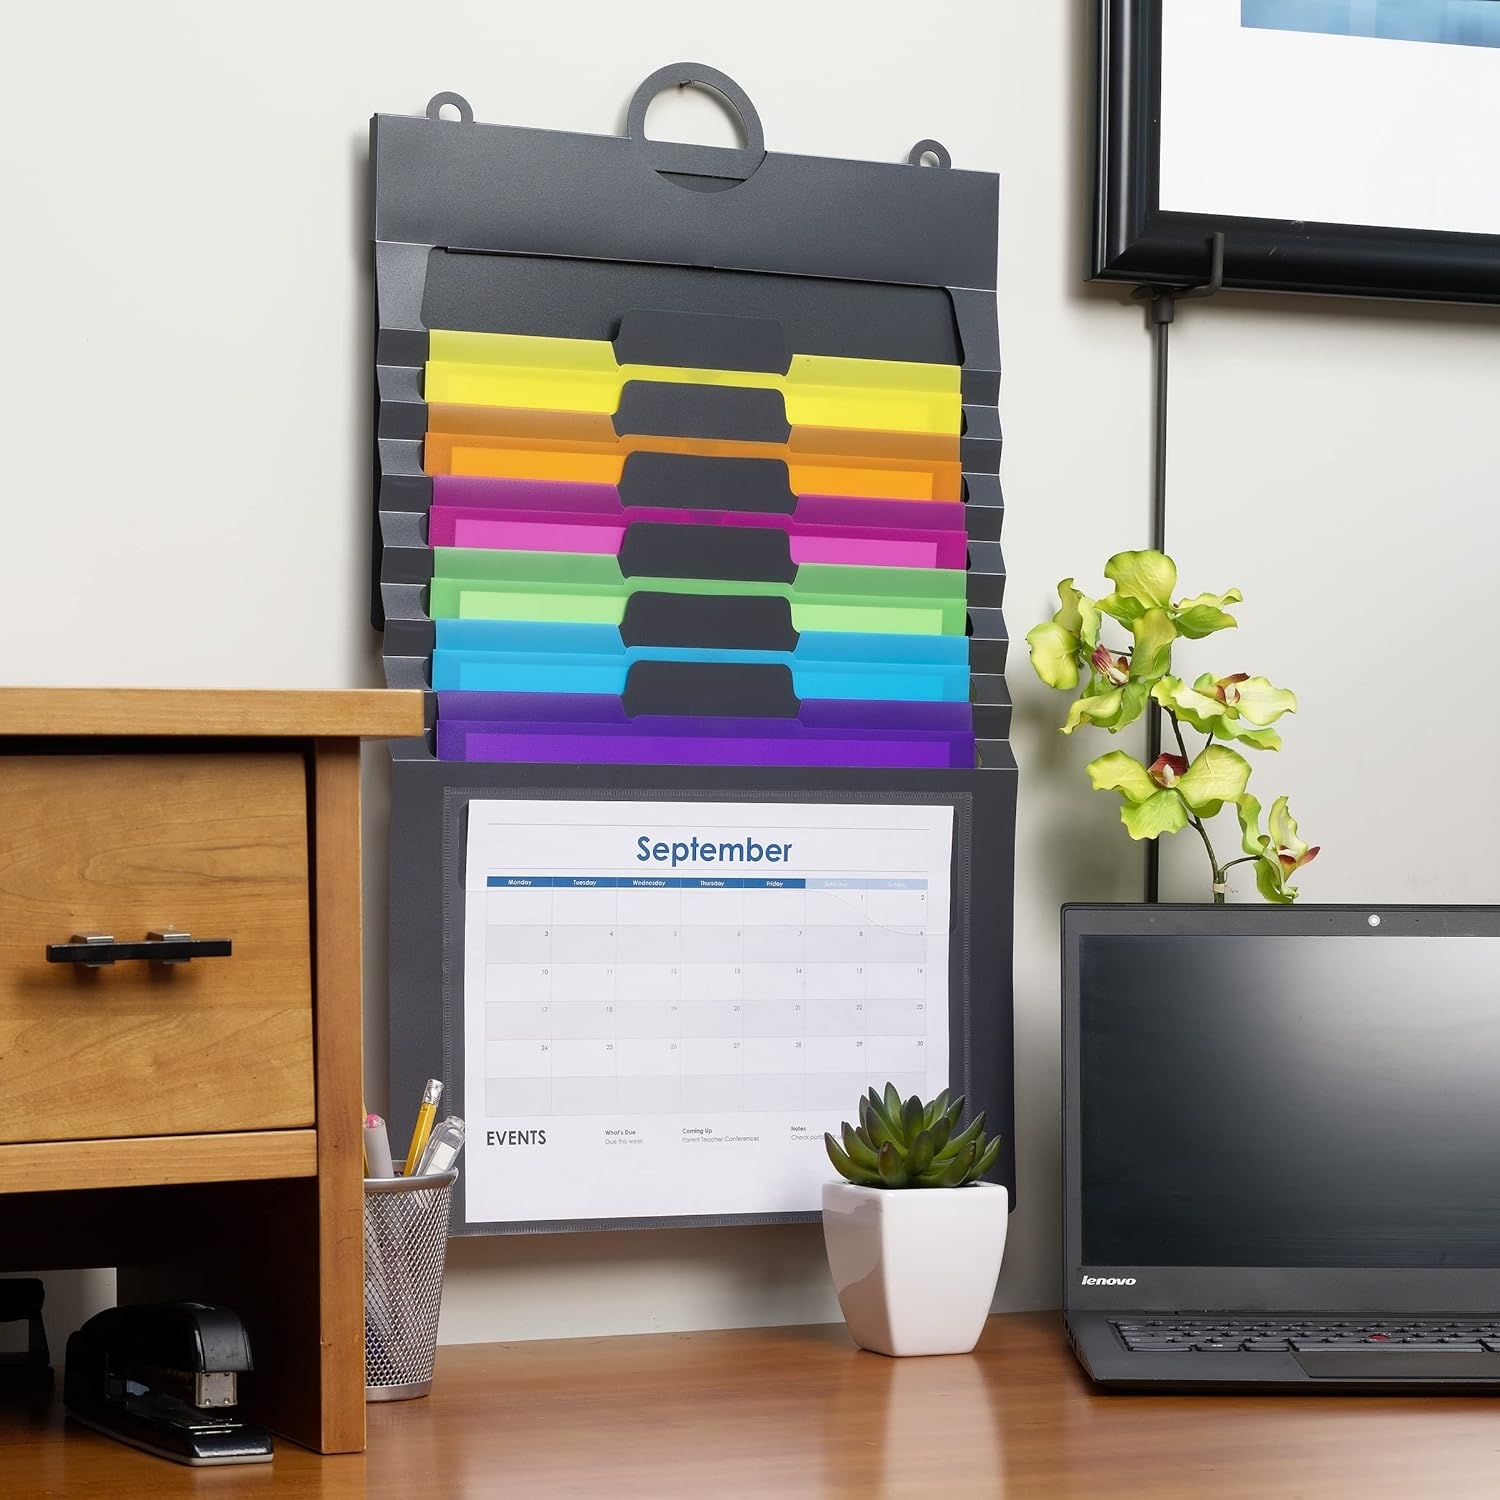 File organizer with colorful tabs attached to a wall above a desk with a calendar, laptop, and plants